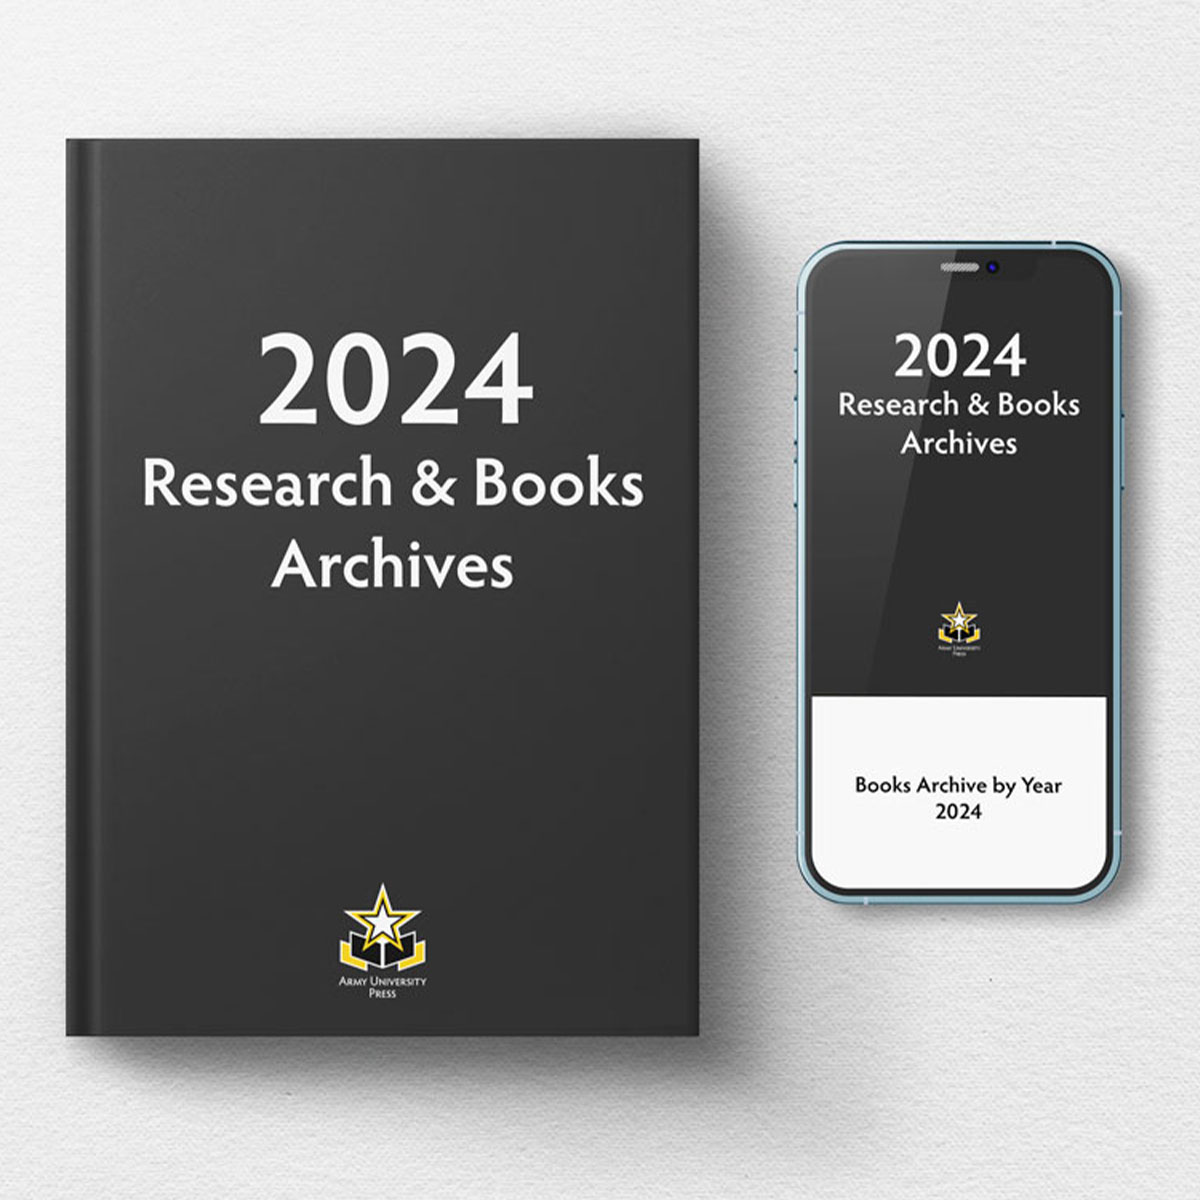 2024 Archives